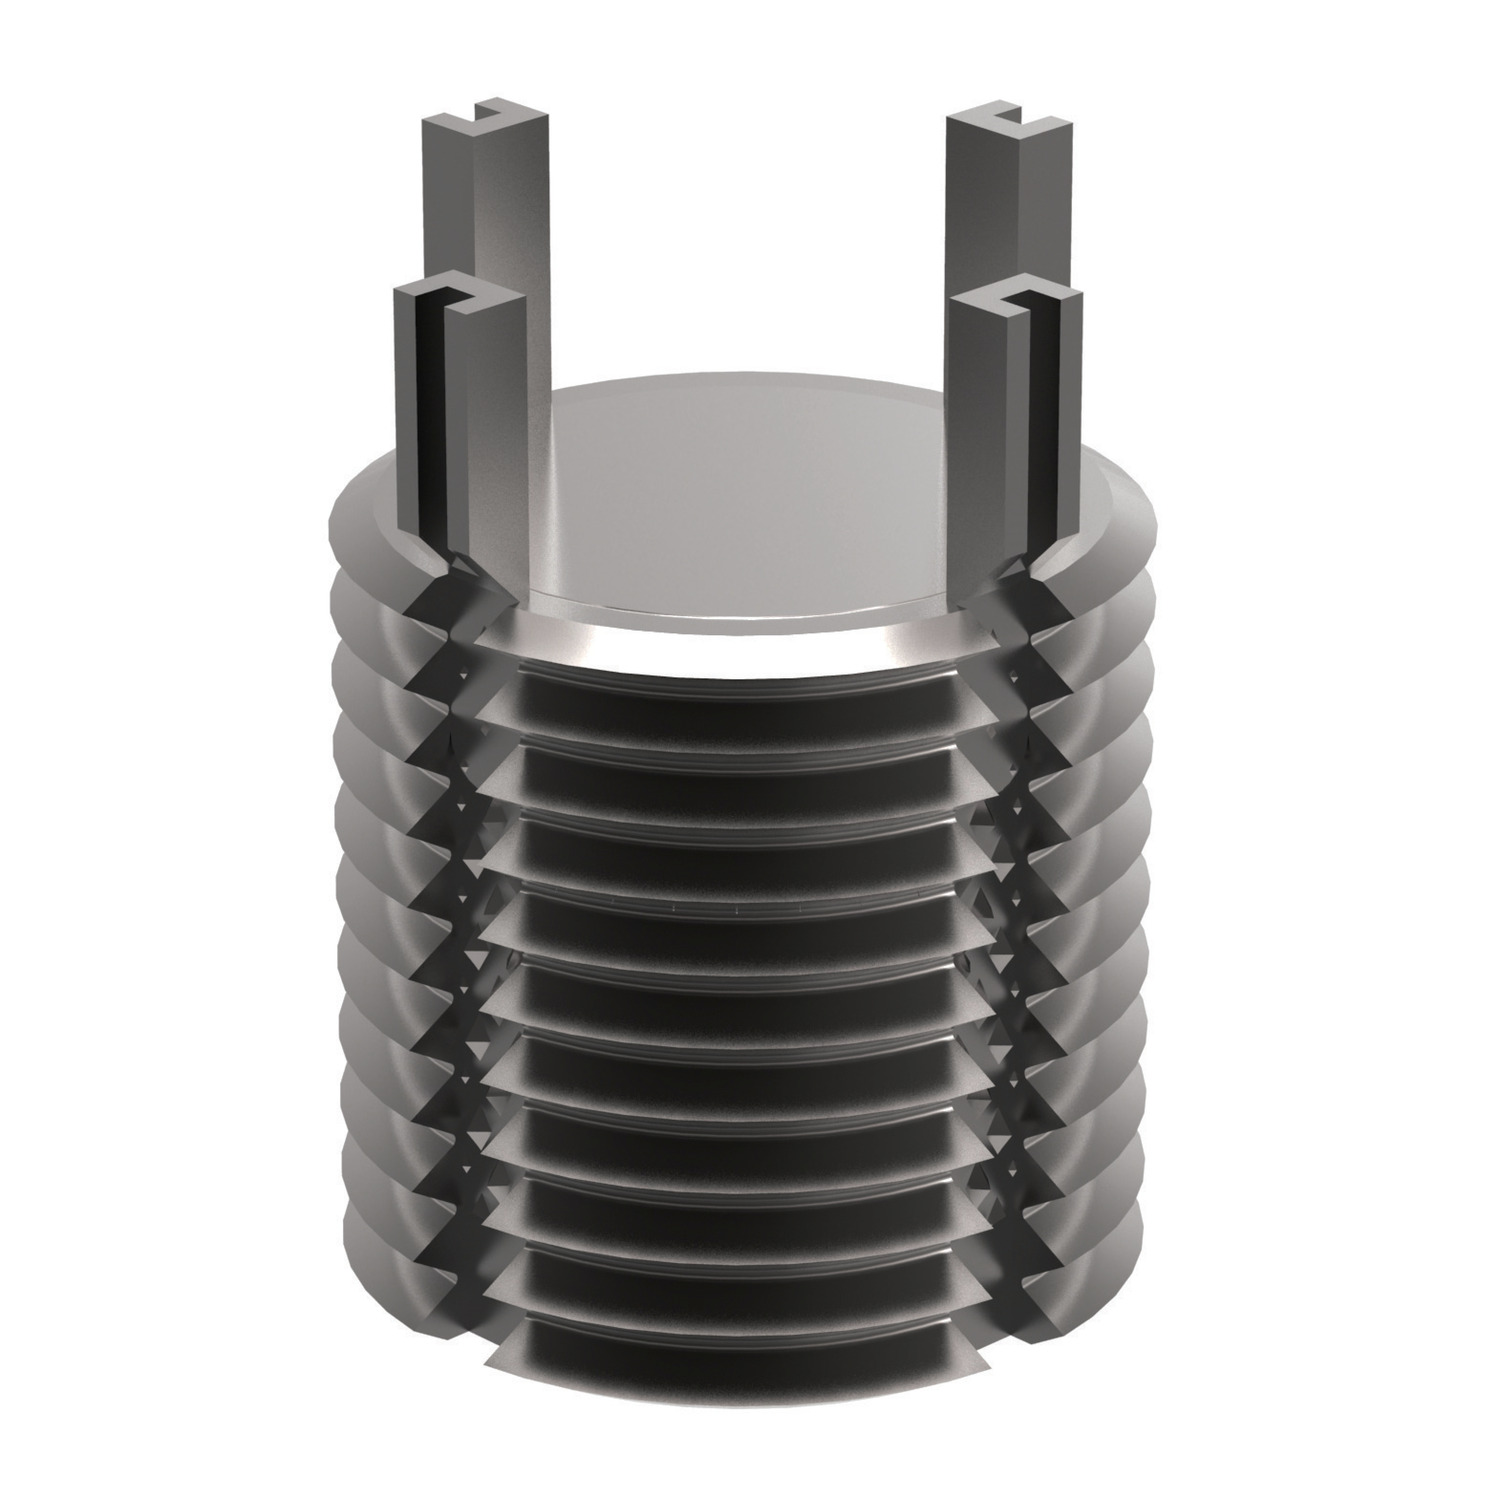 Product 22040, Threaded Insert - Solid - Metric carbon steel / 